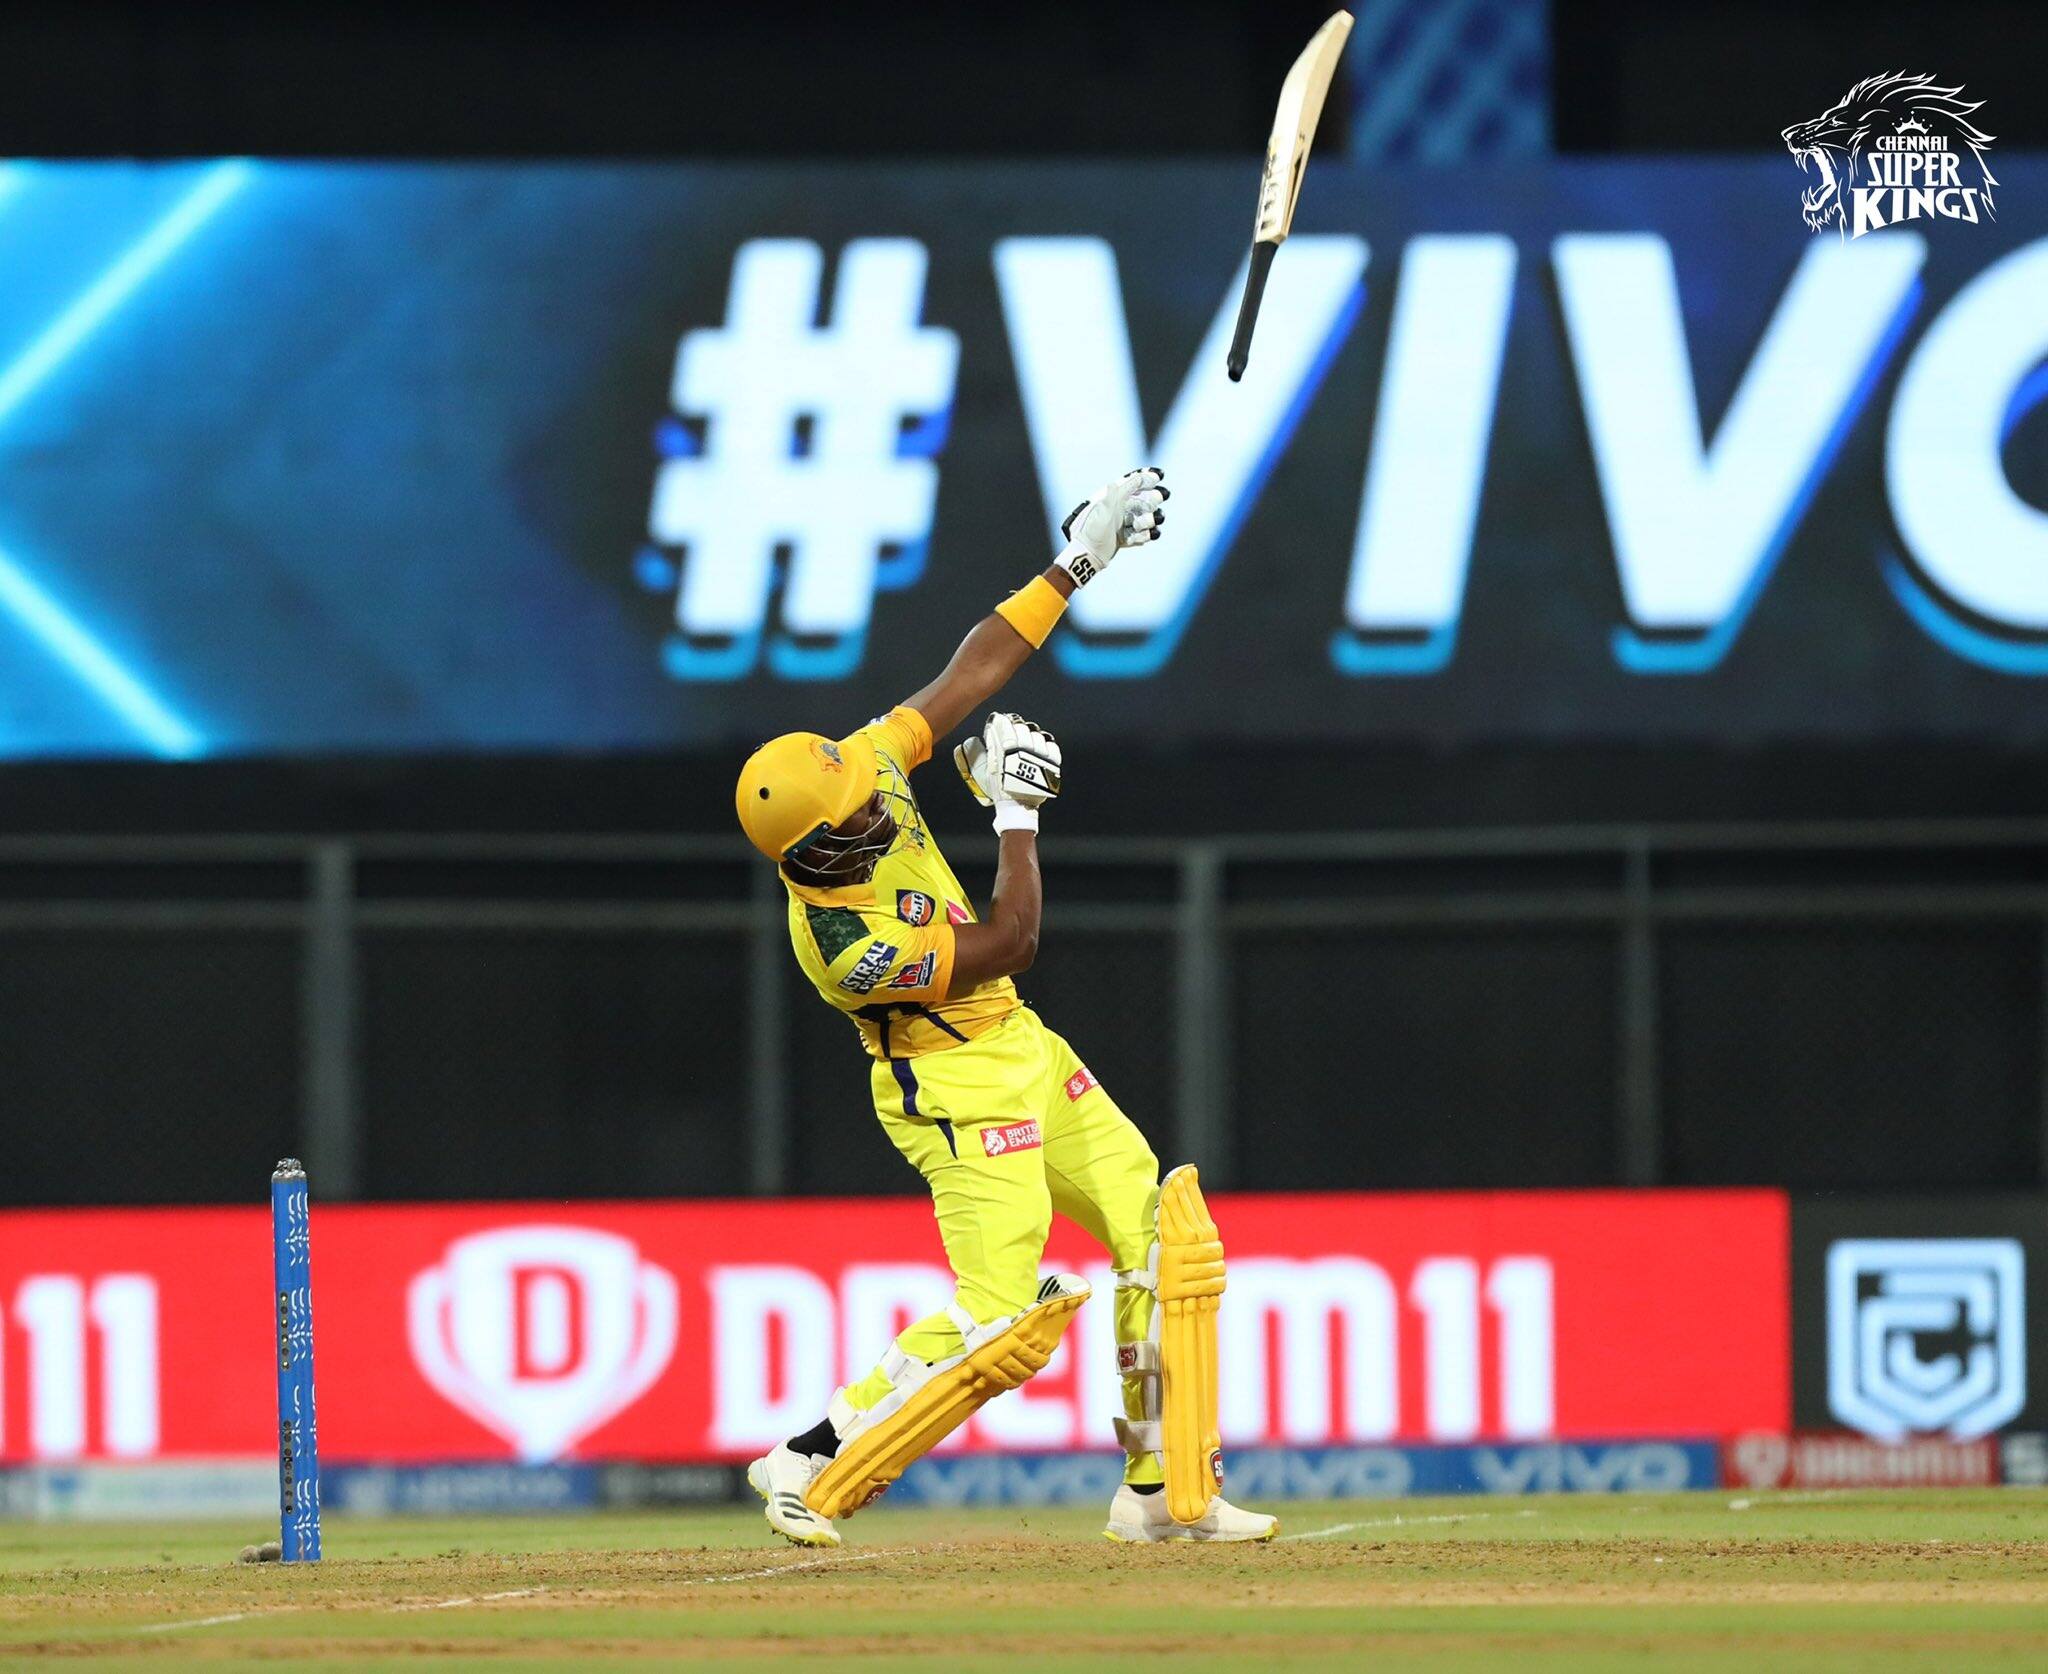 CSK all-rounder Dwayne Bravo loses his bat while going for a big shot against Rajasthan Royals in their IPL 2021 match in Mumbai. (Photo: IPL)